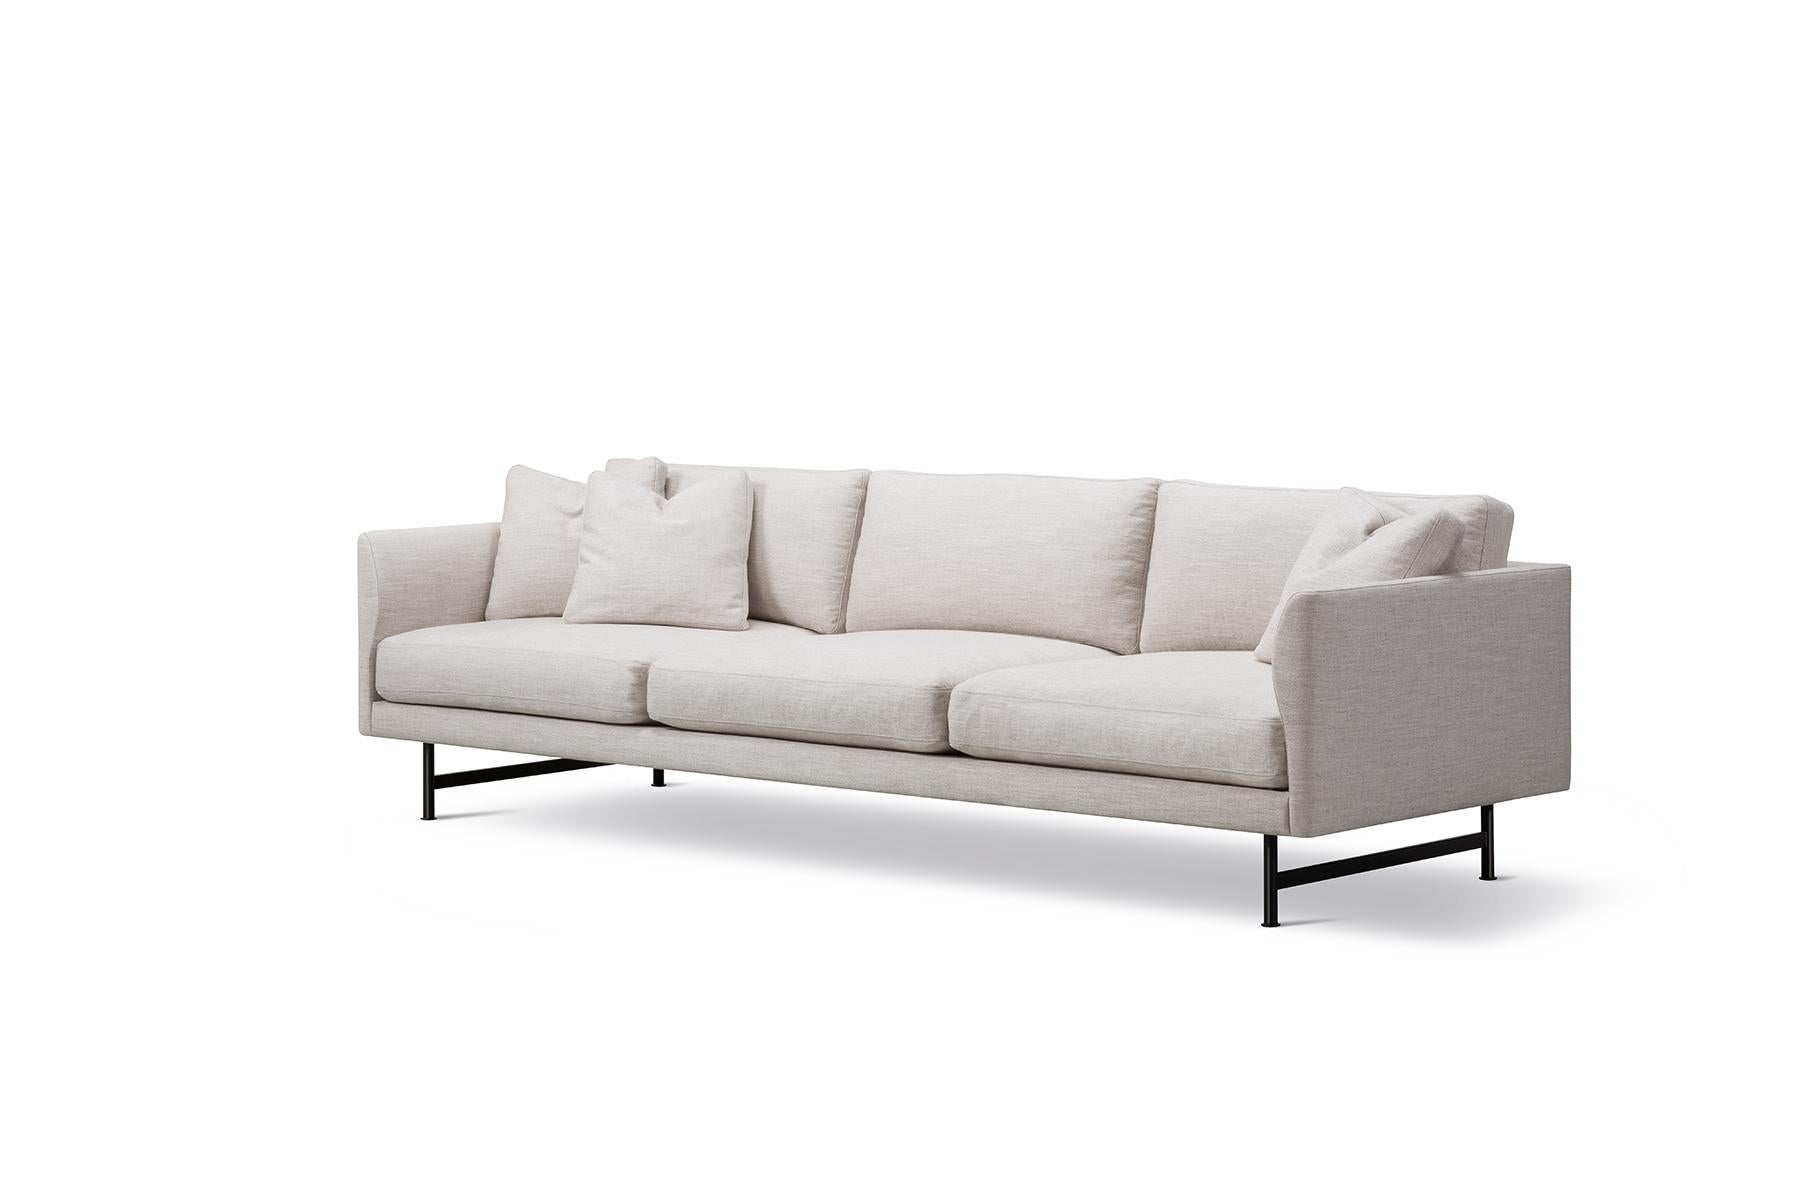 The look is simple and serene in this expansive Hugo Passos Calmo Sofa 80 – 3-seater, where straight lines converge with discrete curved details. Comfy cushions complete the picture in this understated expression of elegance.